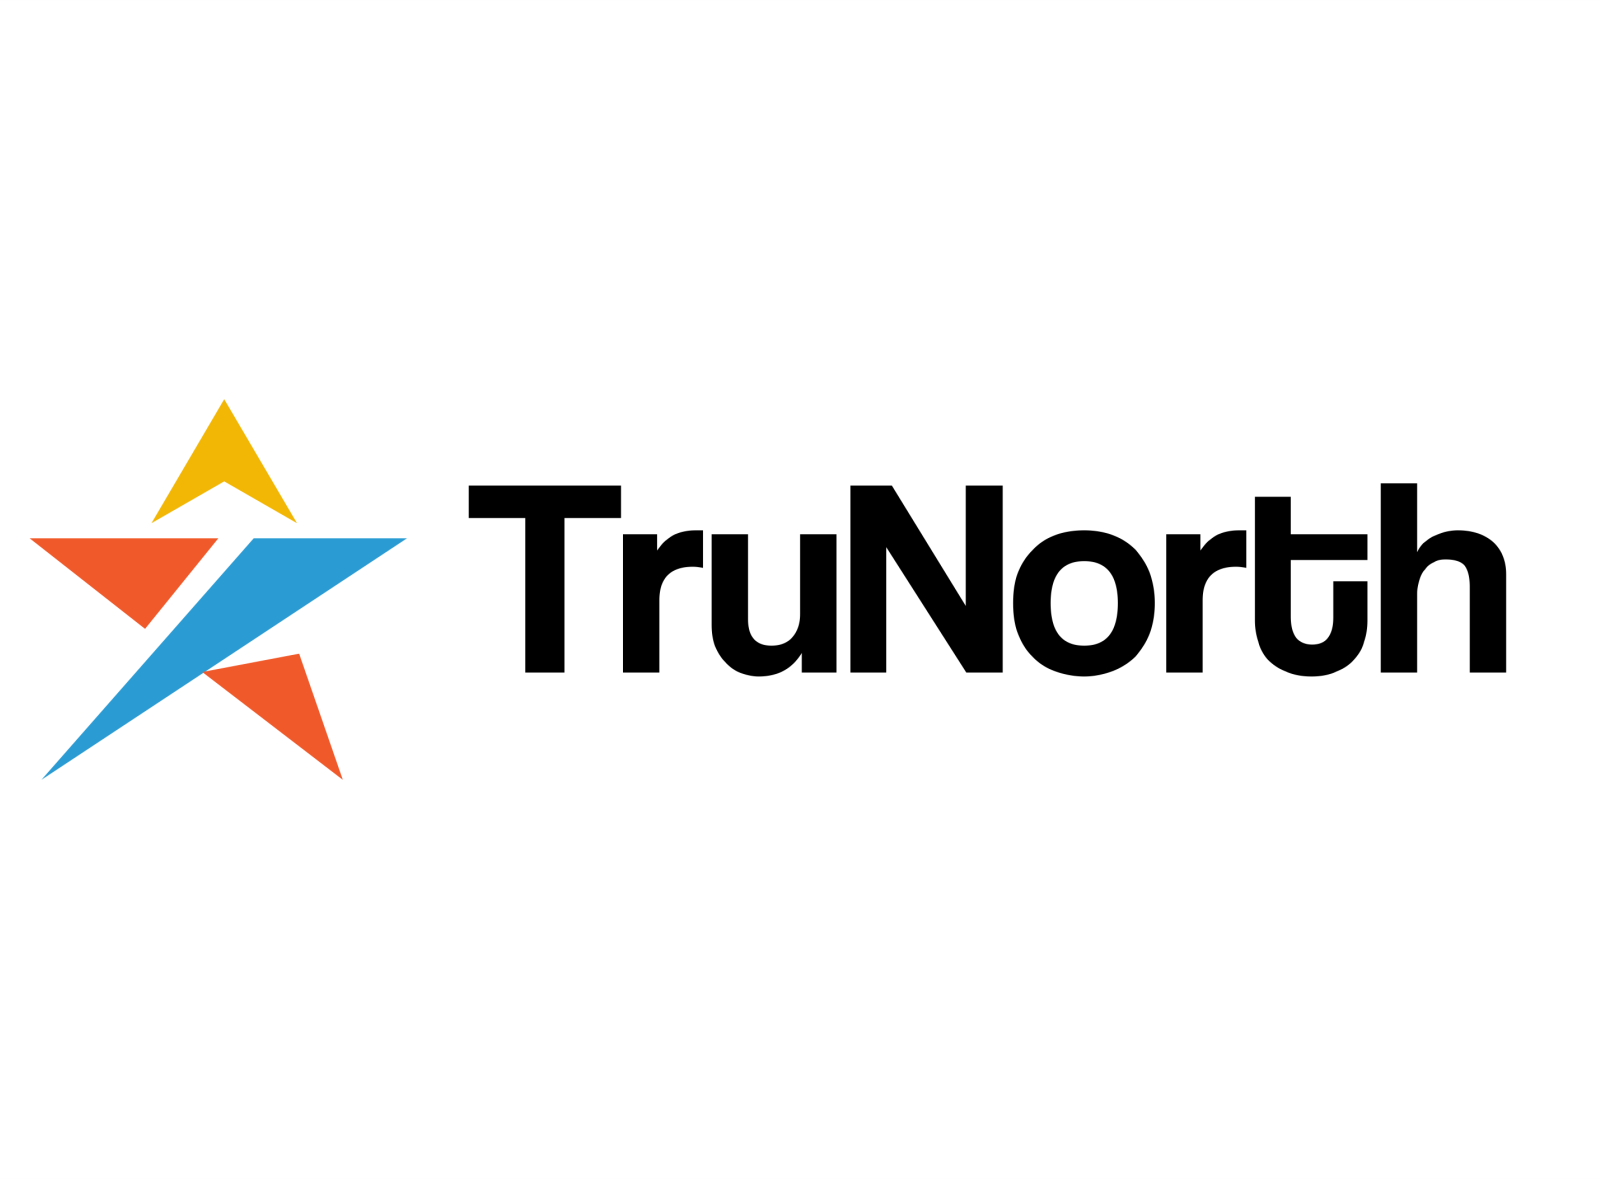 Logo of TruNorth by Wilfred Morienme on Dribbble